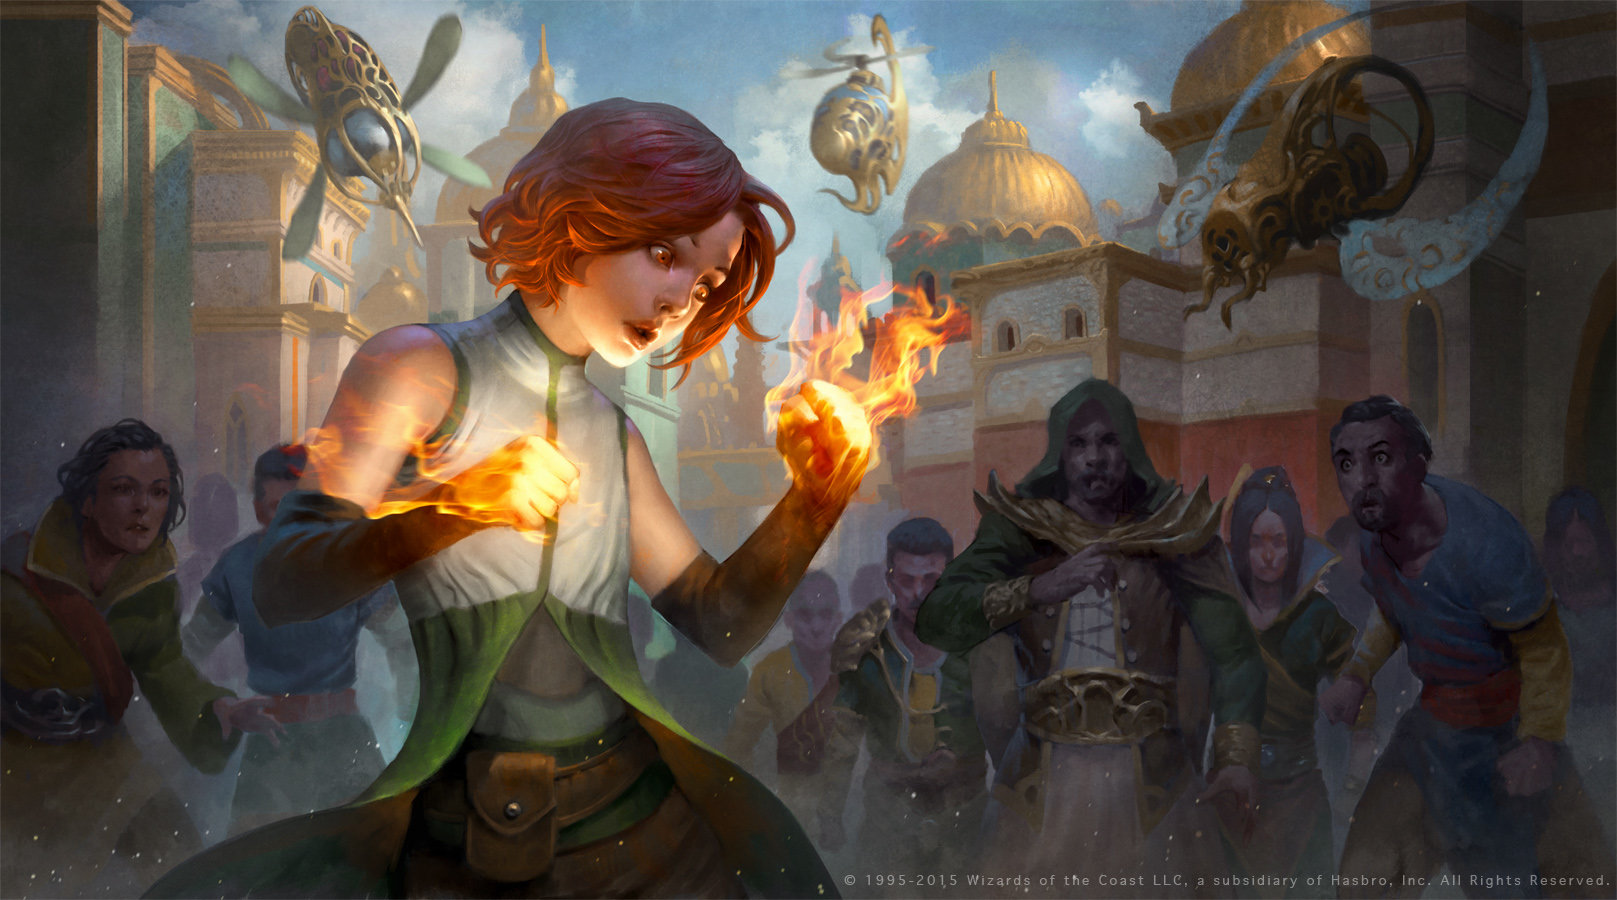 Art by Lius Lasahido, from the story “Chandra’s Origin: Fire Logic”. Young Chandra Nalaar, a red-haired girl of 11, looks down in wonder and surprise at fire which has exploded unexpectedly from her hands. Bystanders on the crowded street watch with reactions from ranging from awe to anger.